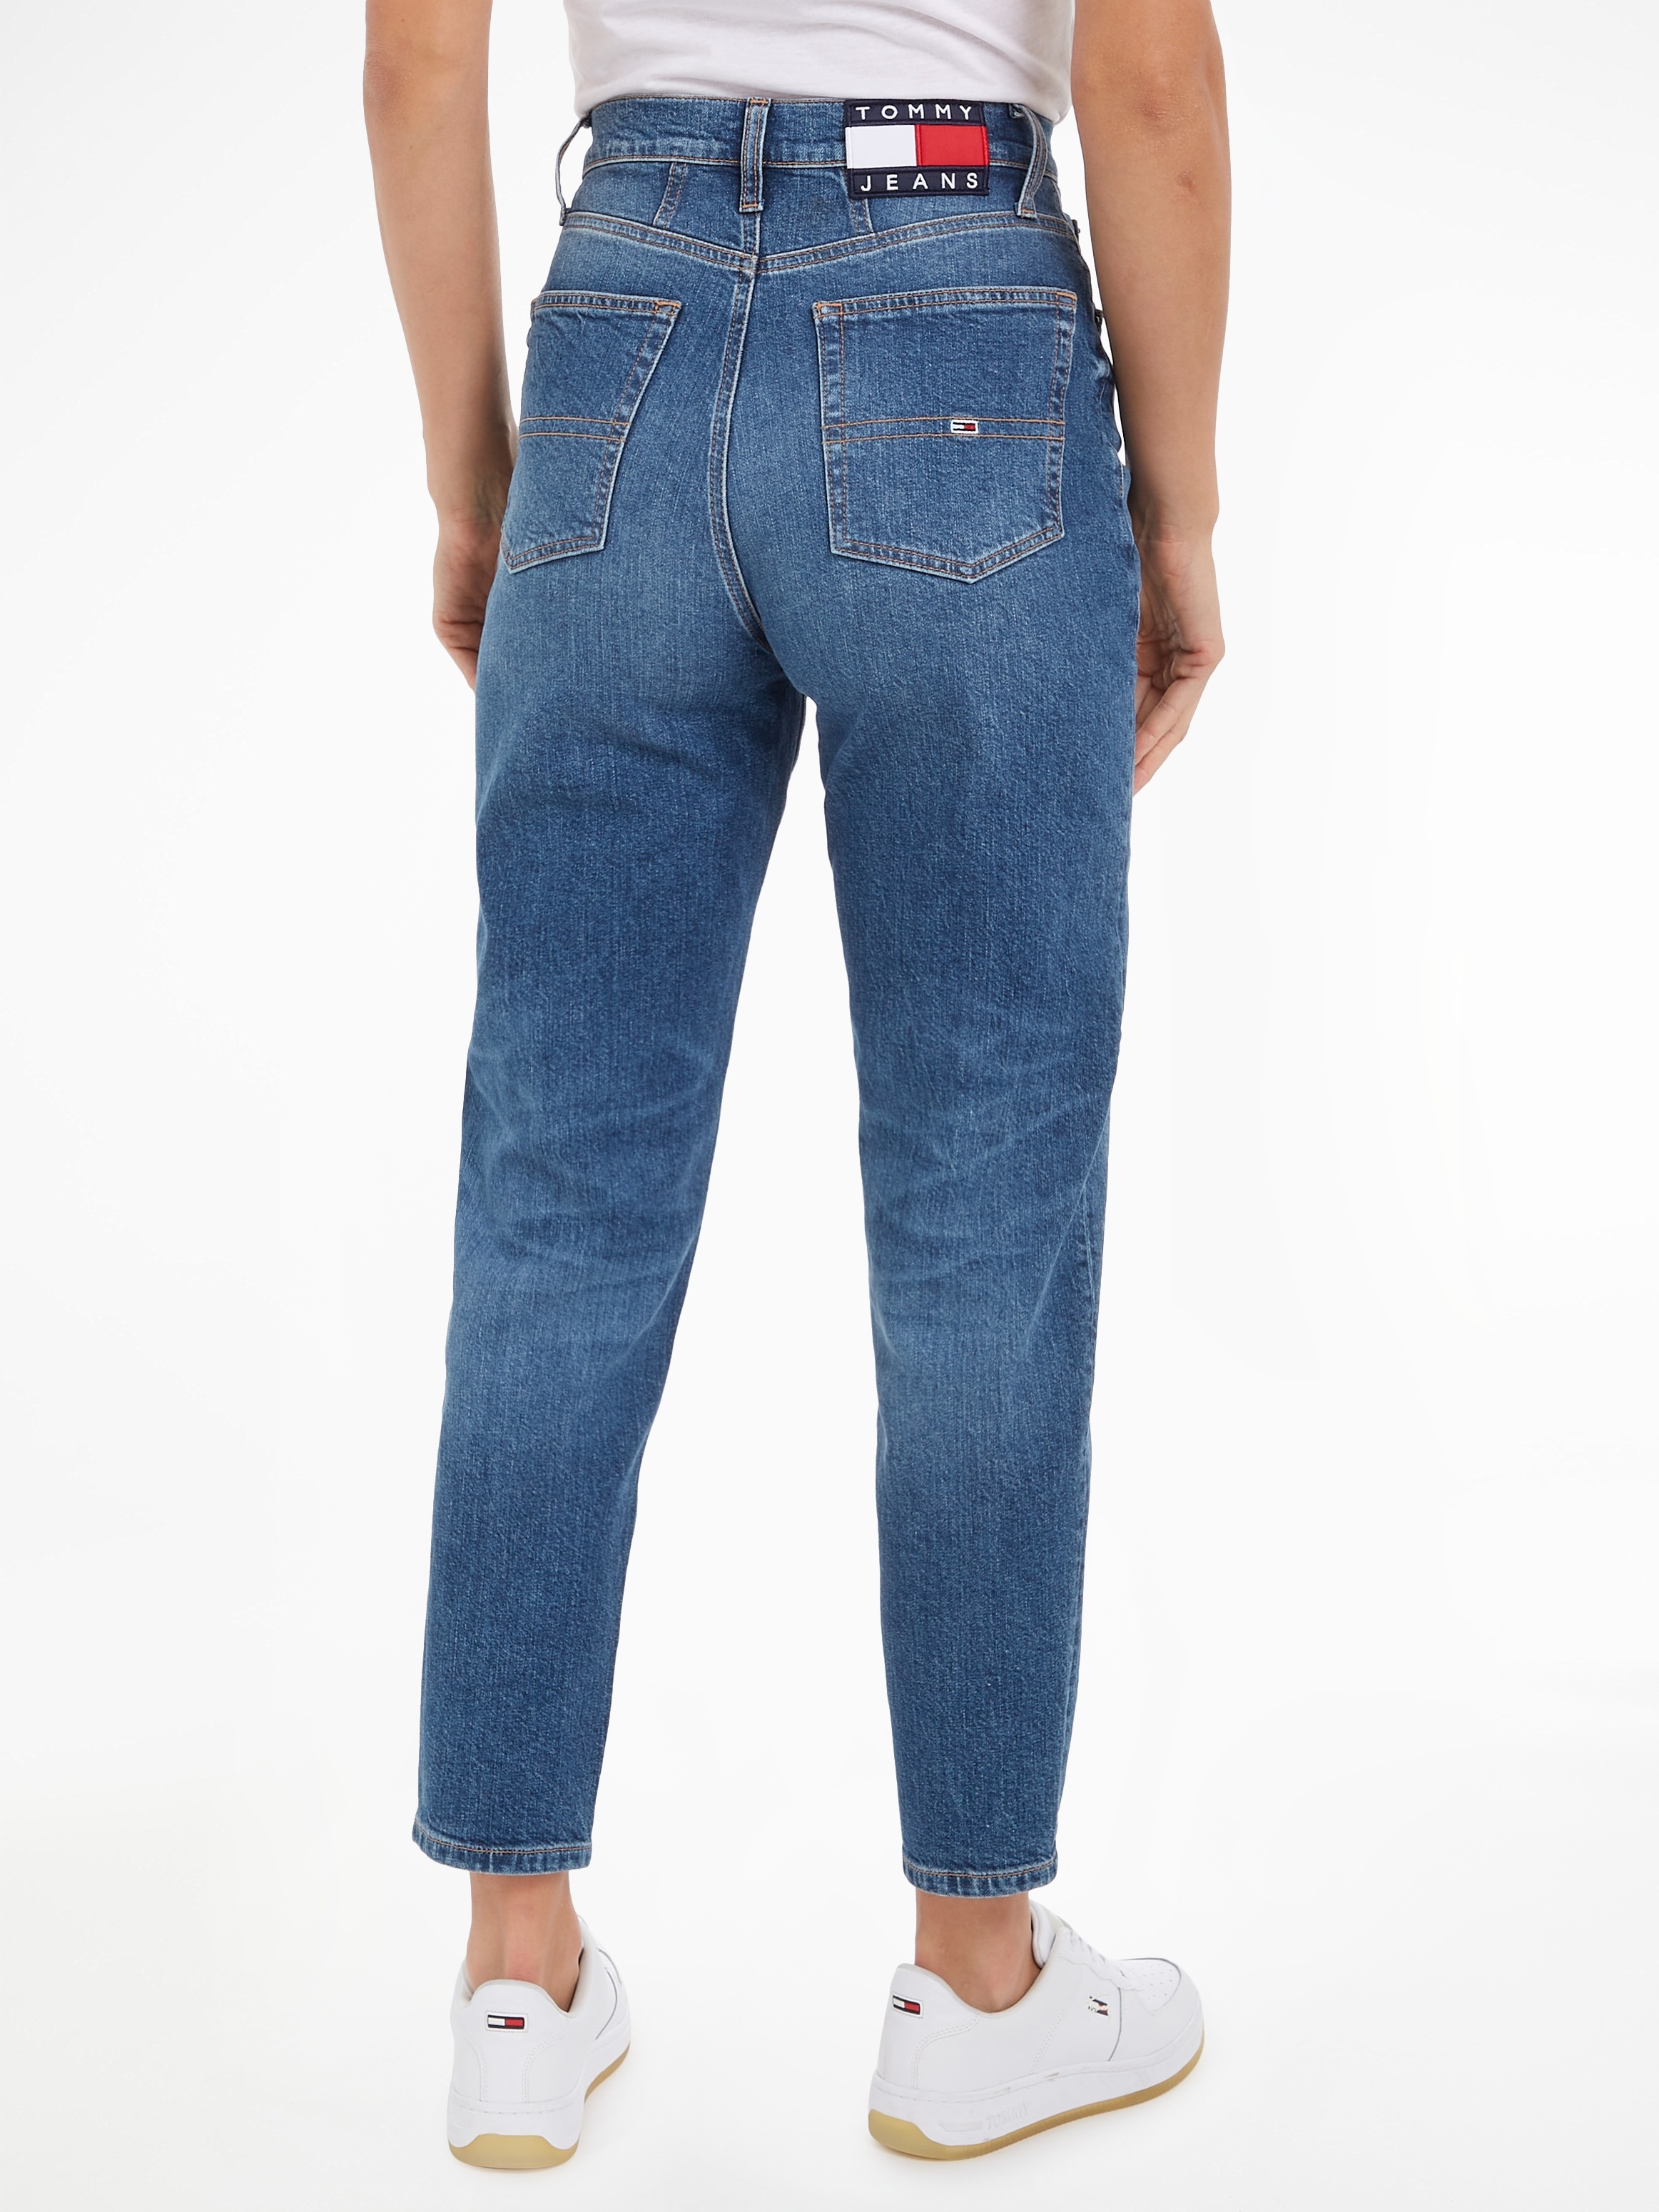 Tommy Jeans Mom-Jeans »MOM JEAN UHR TPR CG5136«, mit Logobadge und  Labelflags online | I'm walking